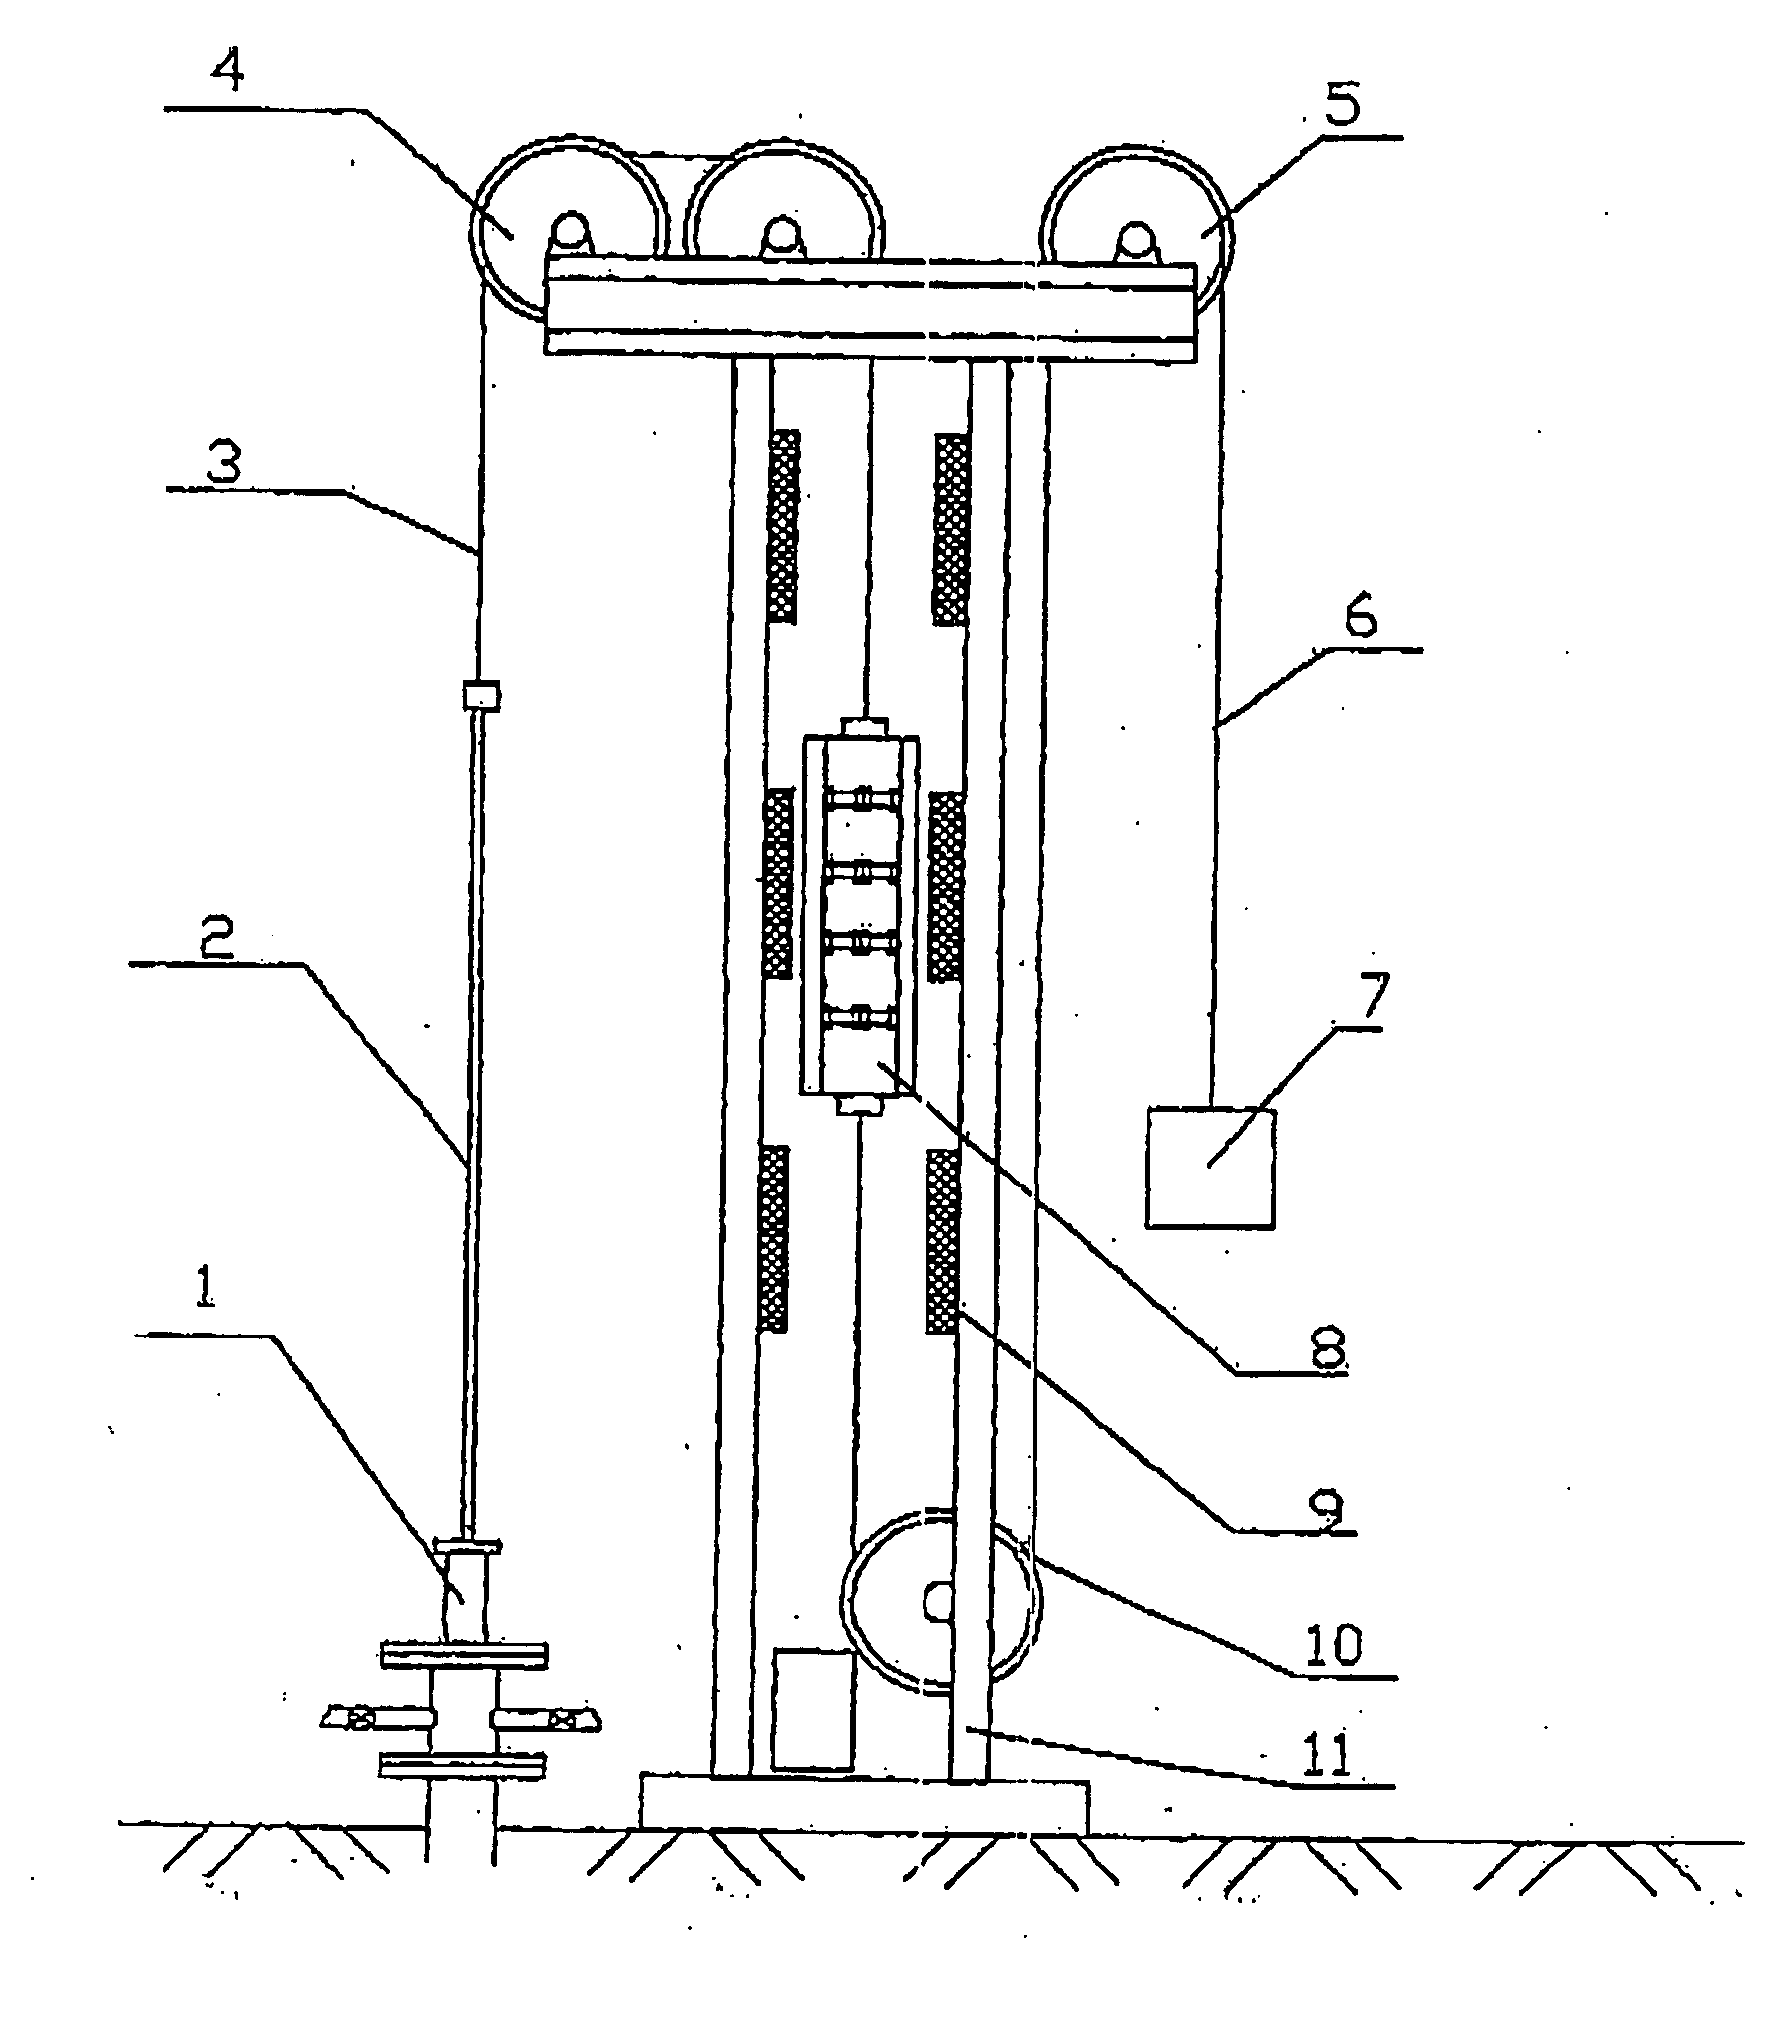 Pumping unit driven by a linear electric motor